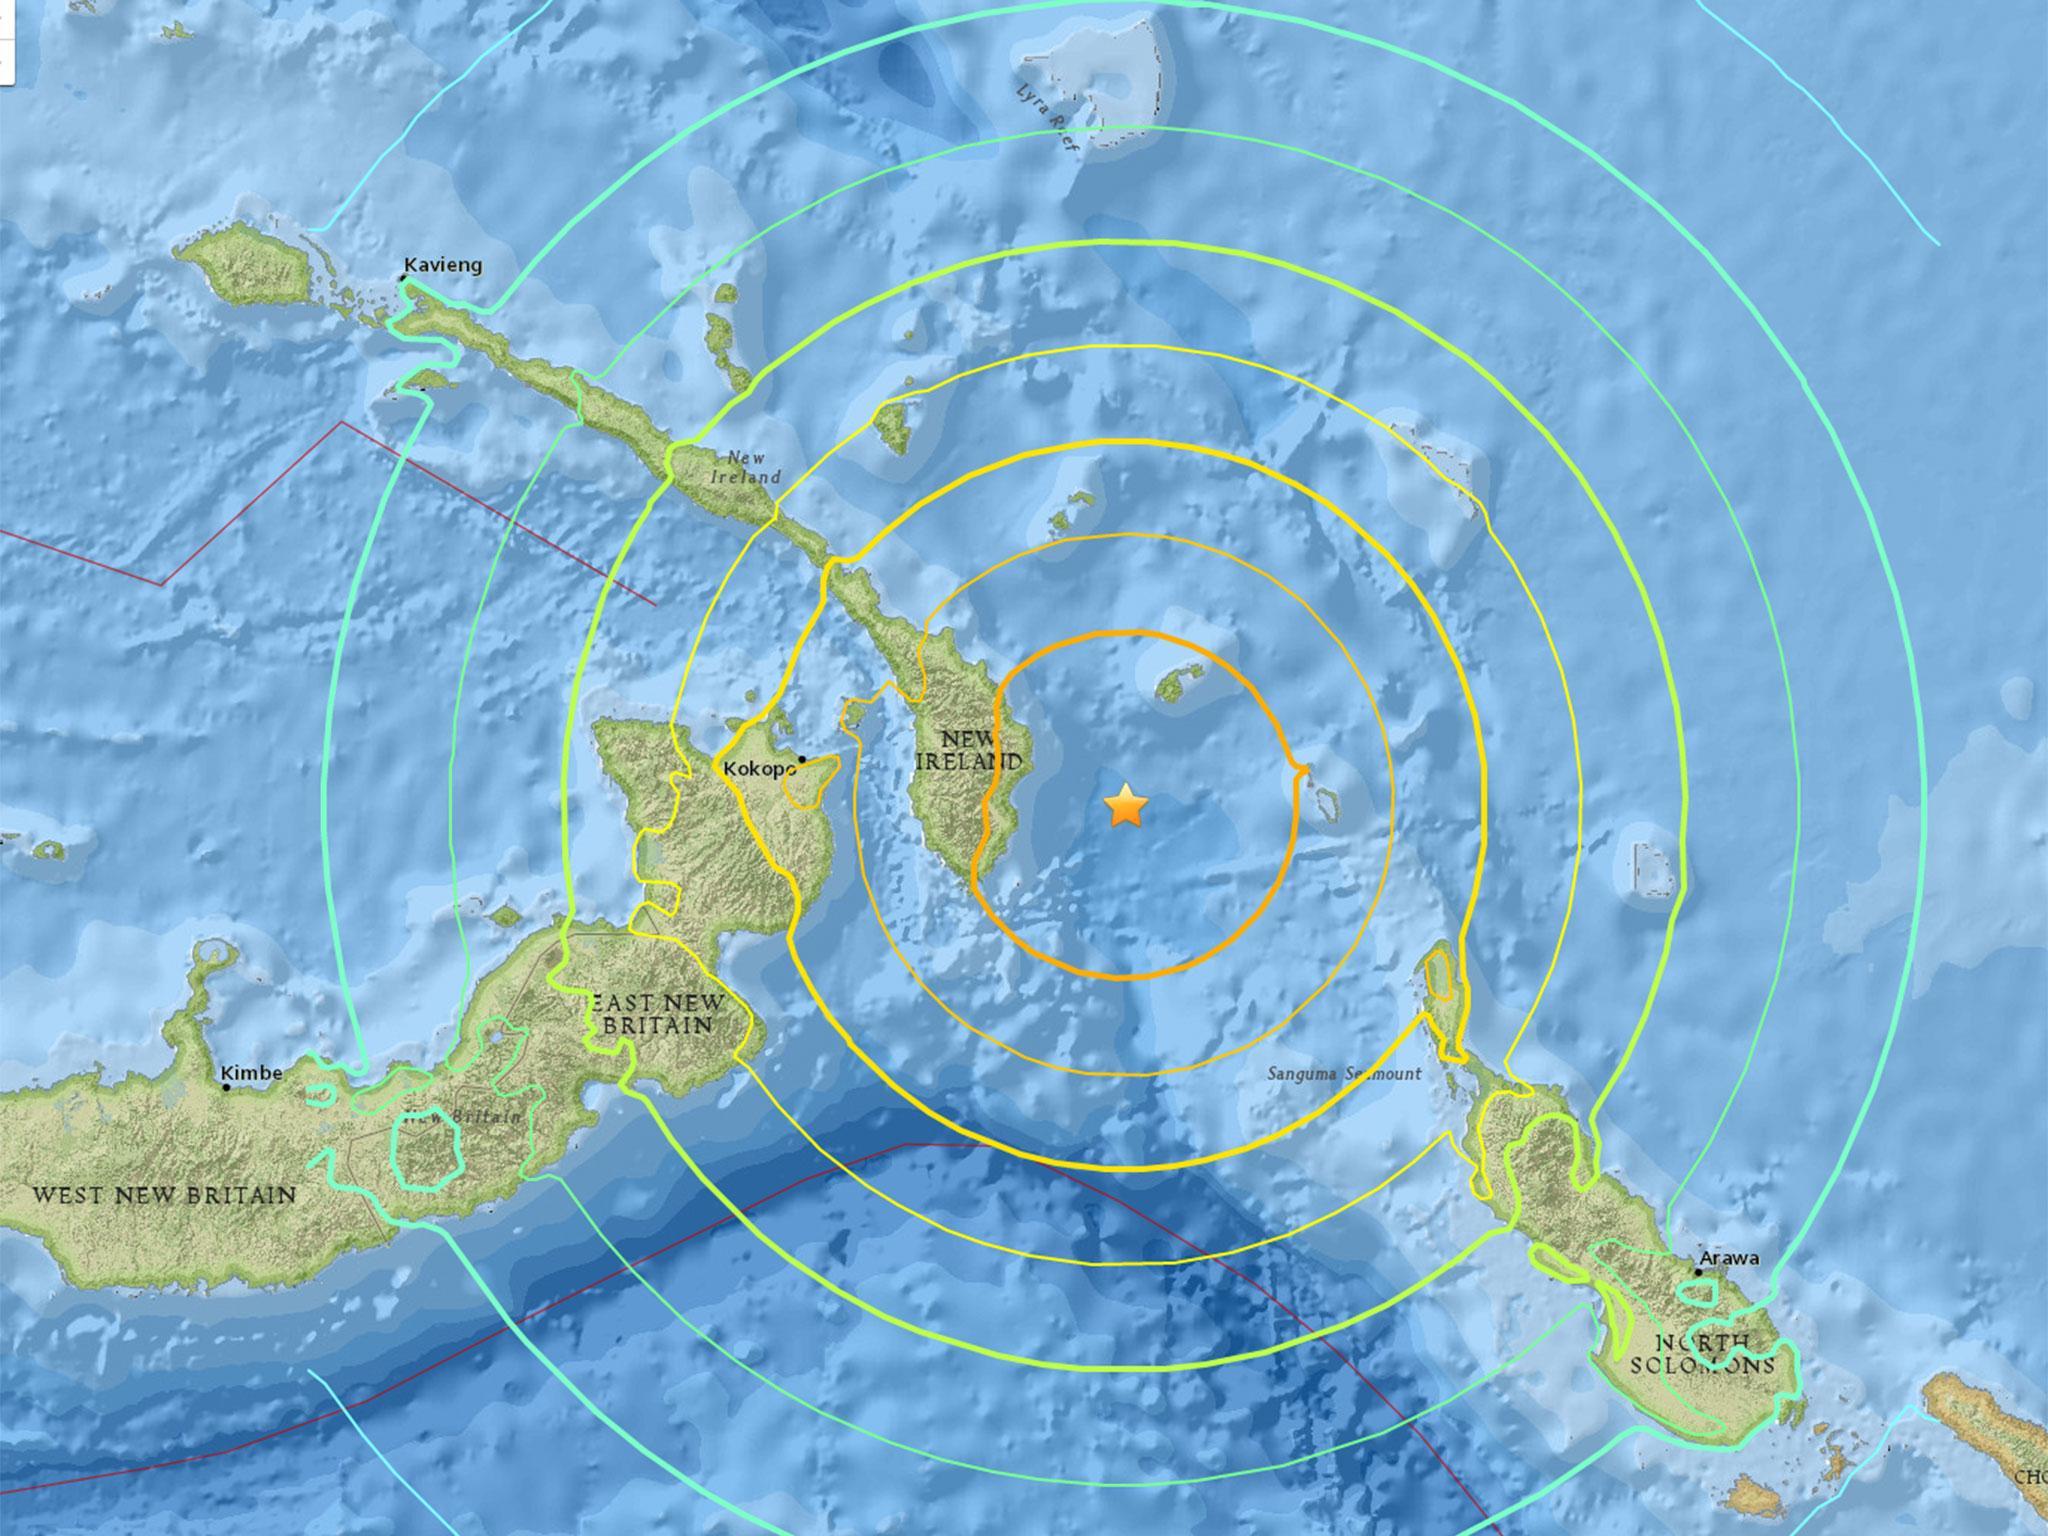 An image showing the epicenter of the earthquake off Papua New Guinea